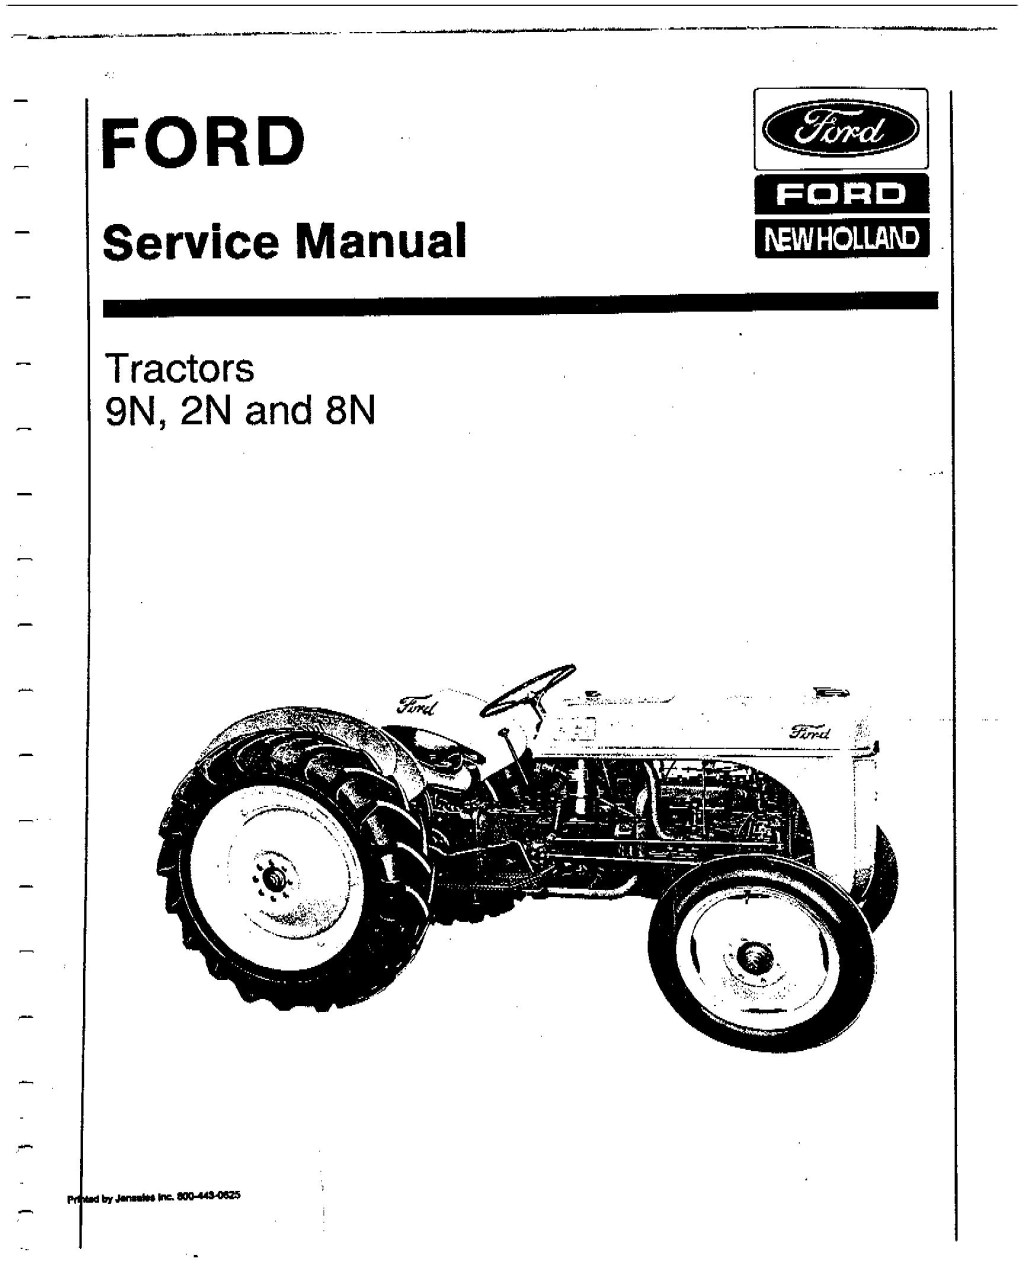 Picture of: Ford n n n New Holland Service Manual by NathanHardenj – Issuu